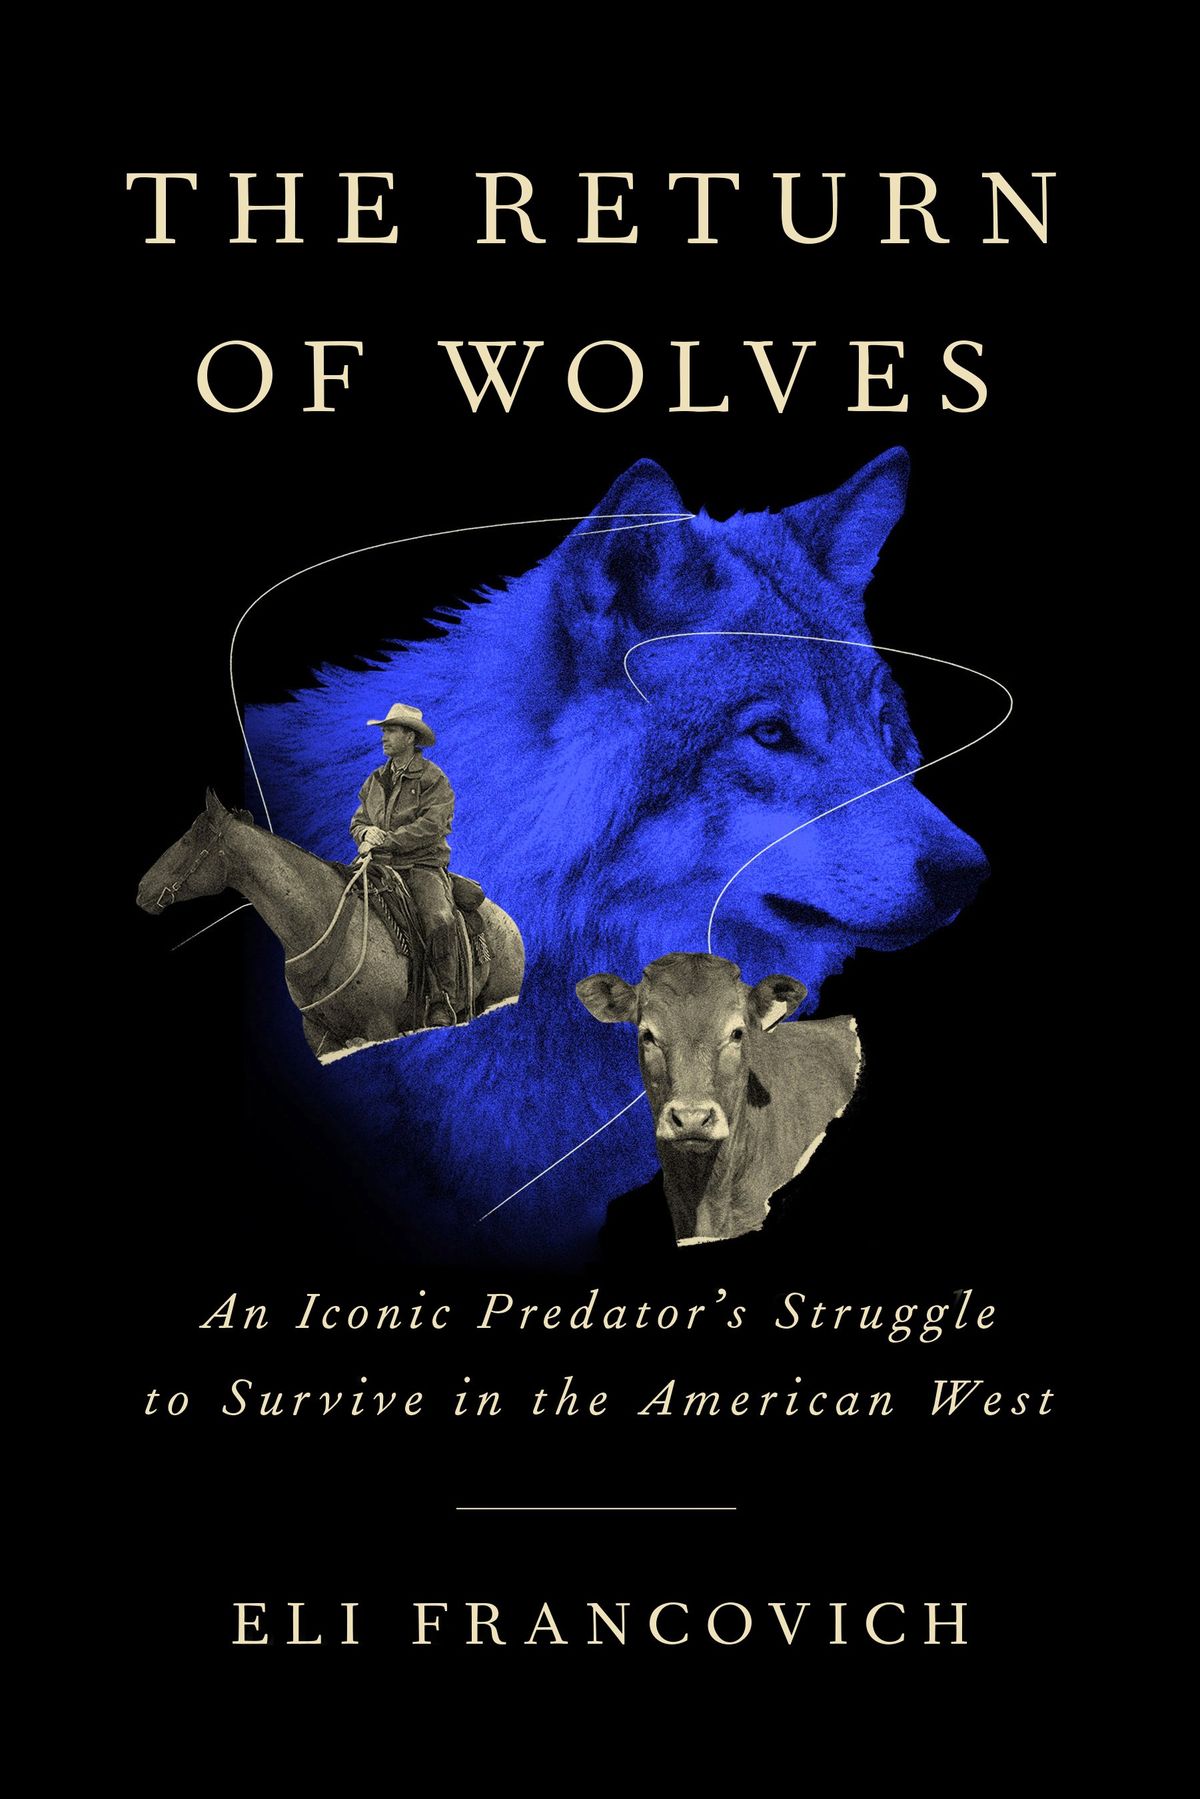 Eli Francovich’s book, “The Return of Wolves,” will be the subject of a Northtwest Passages Book Club event on April 13.  (Workman Publishing)